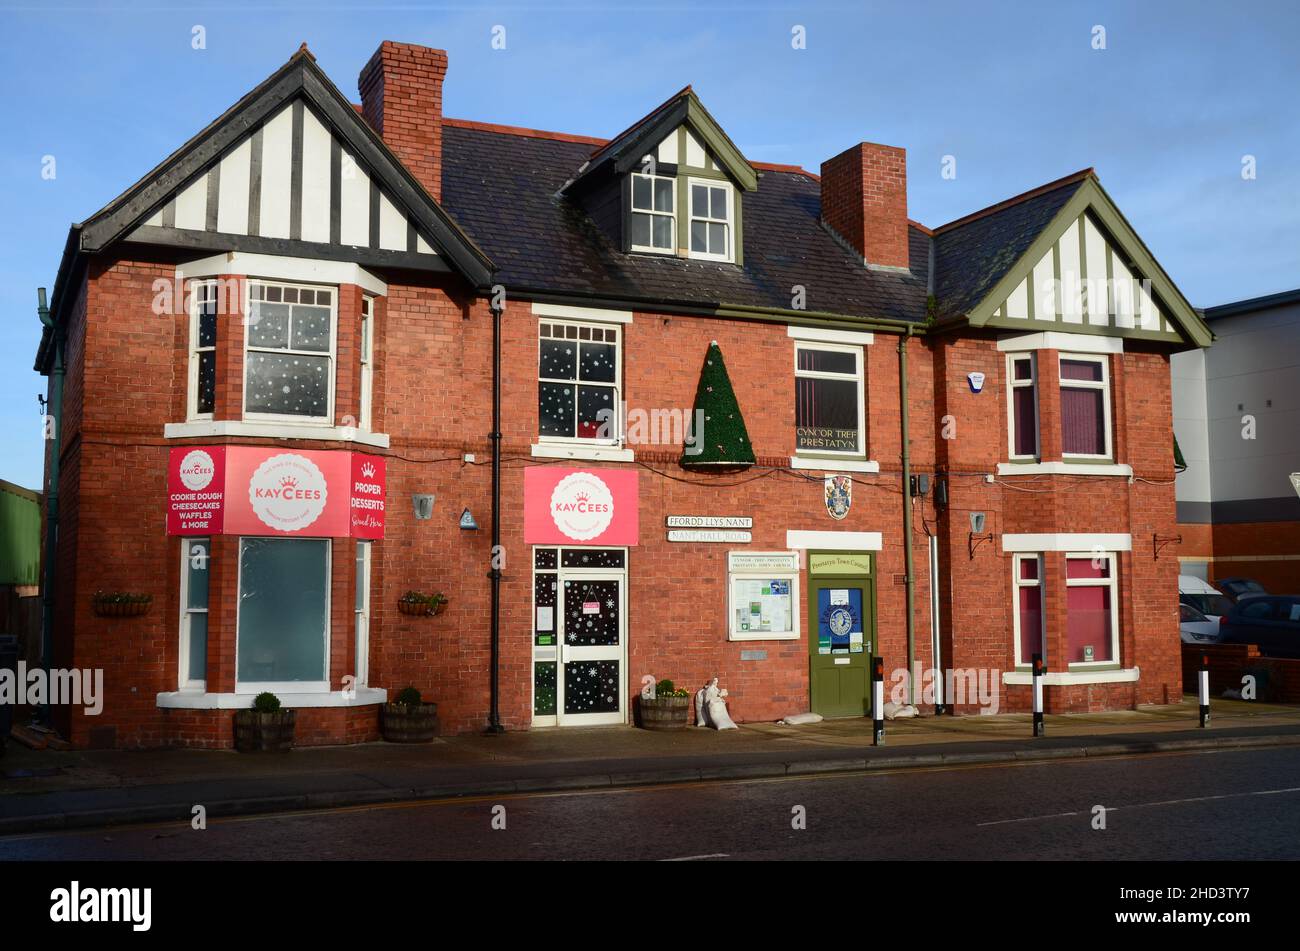 Prestatyn, UK: Dec 14, 2021: Kaycees Desserts are neighbours with the Prestatyn Town Council offices on Nant Hall Road. Stock Photo